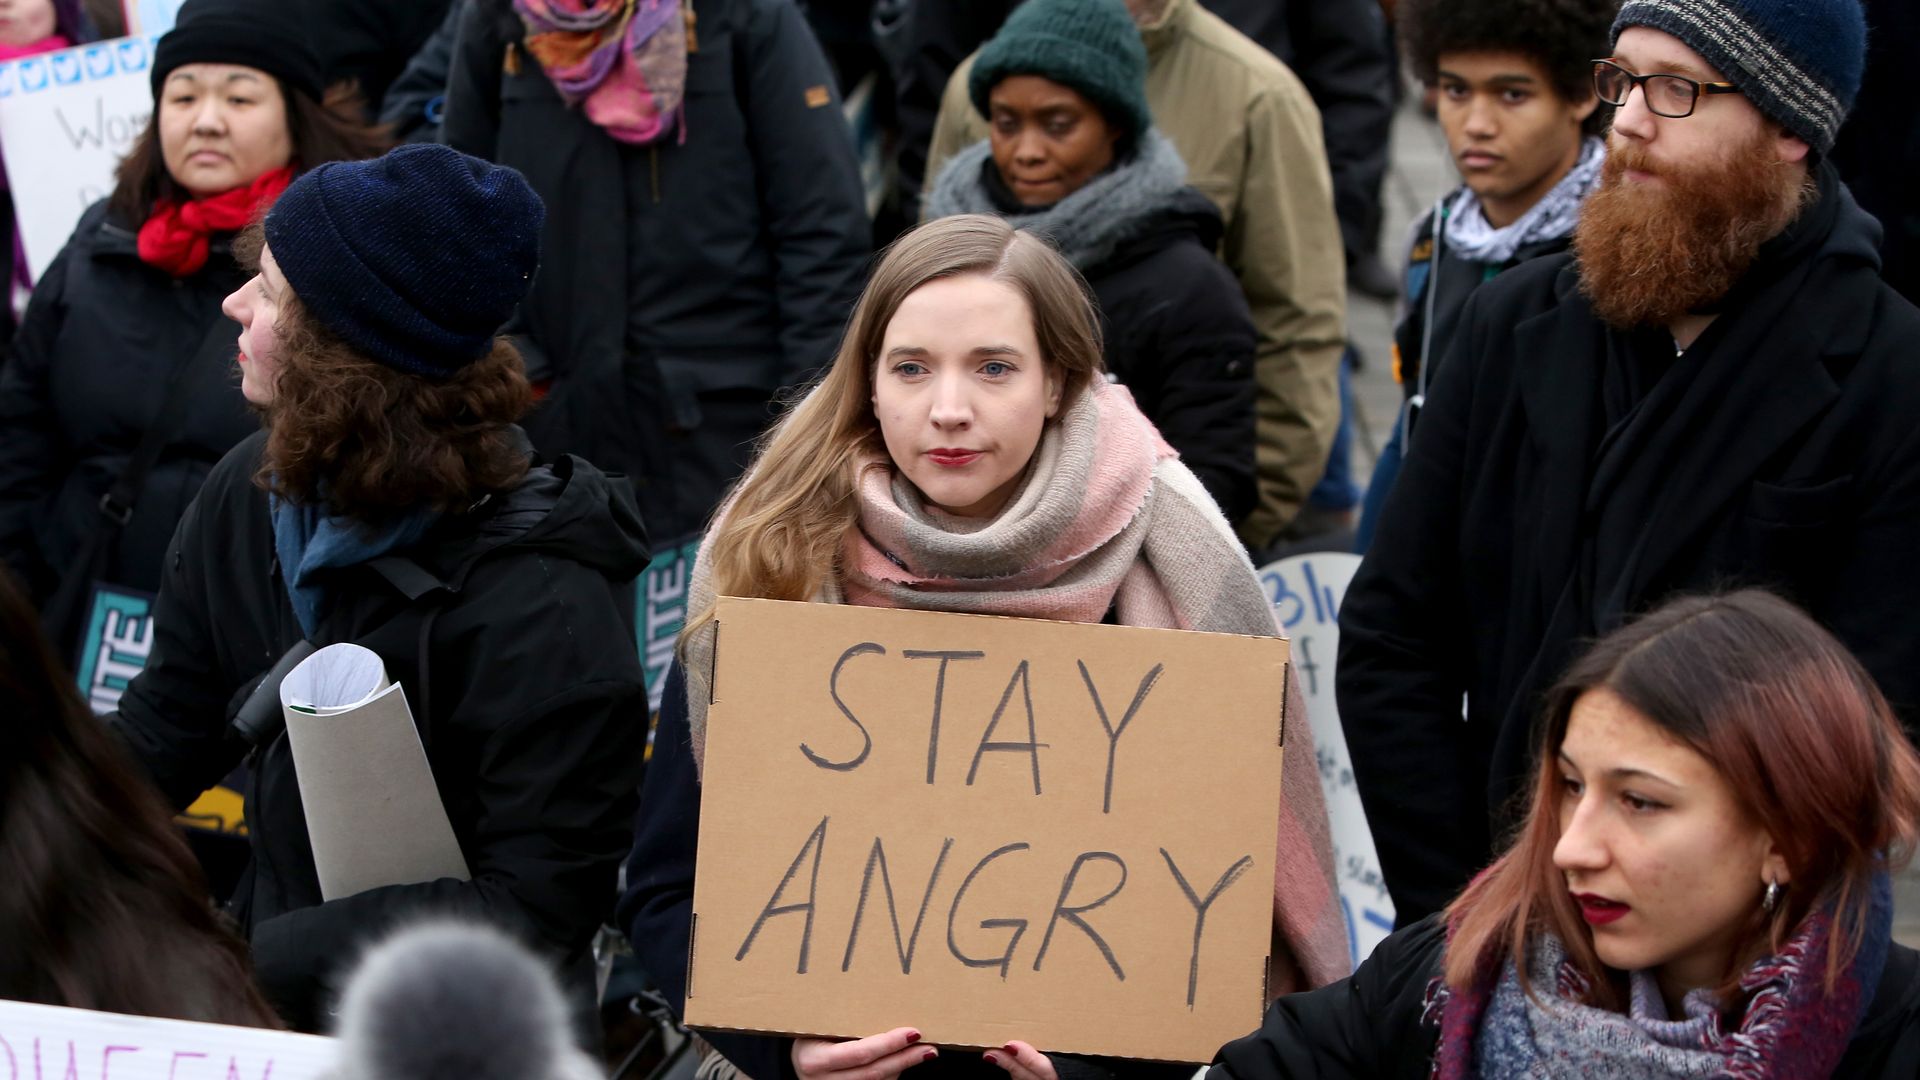 A woman holds a sign that says "Stay angry"